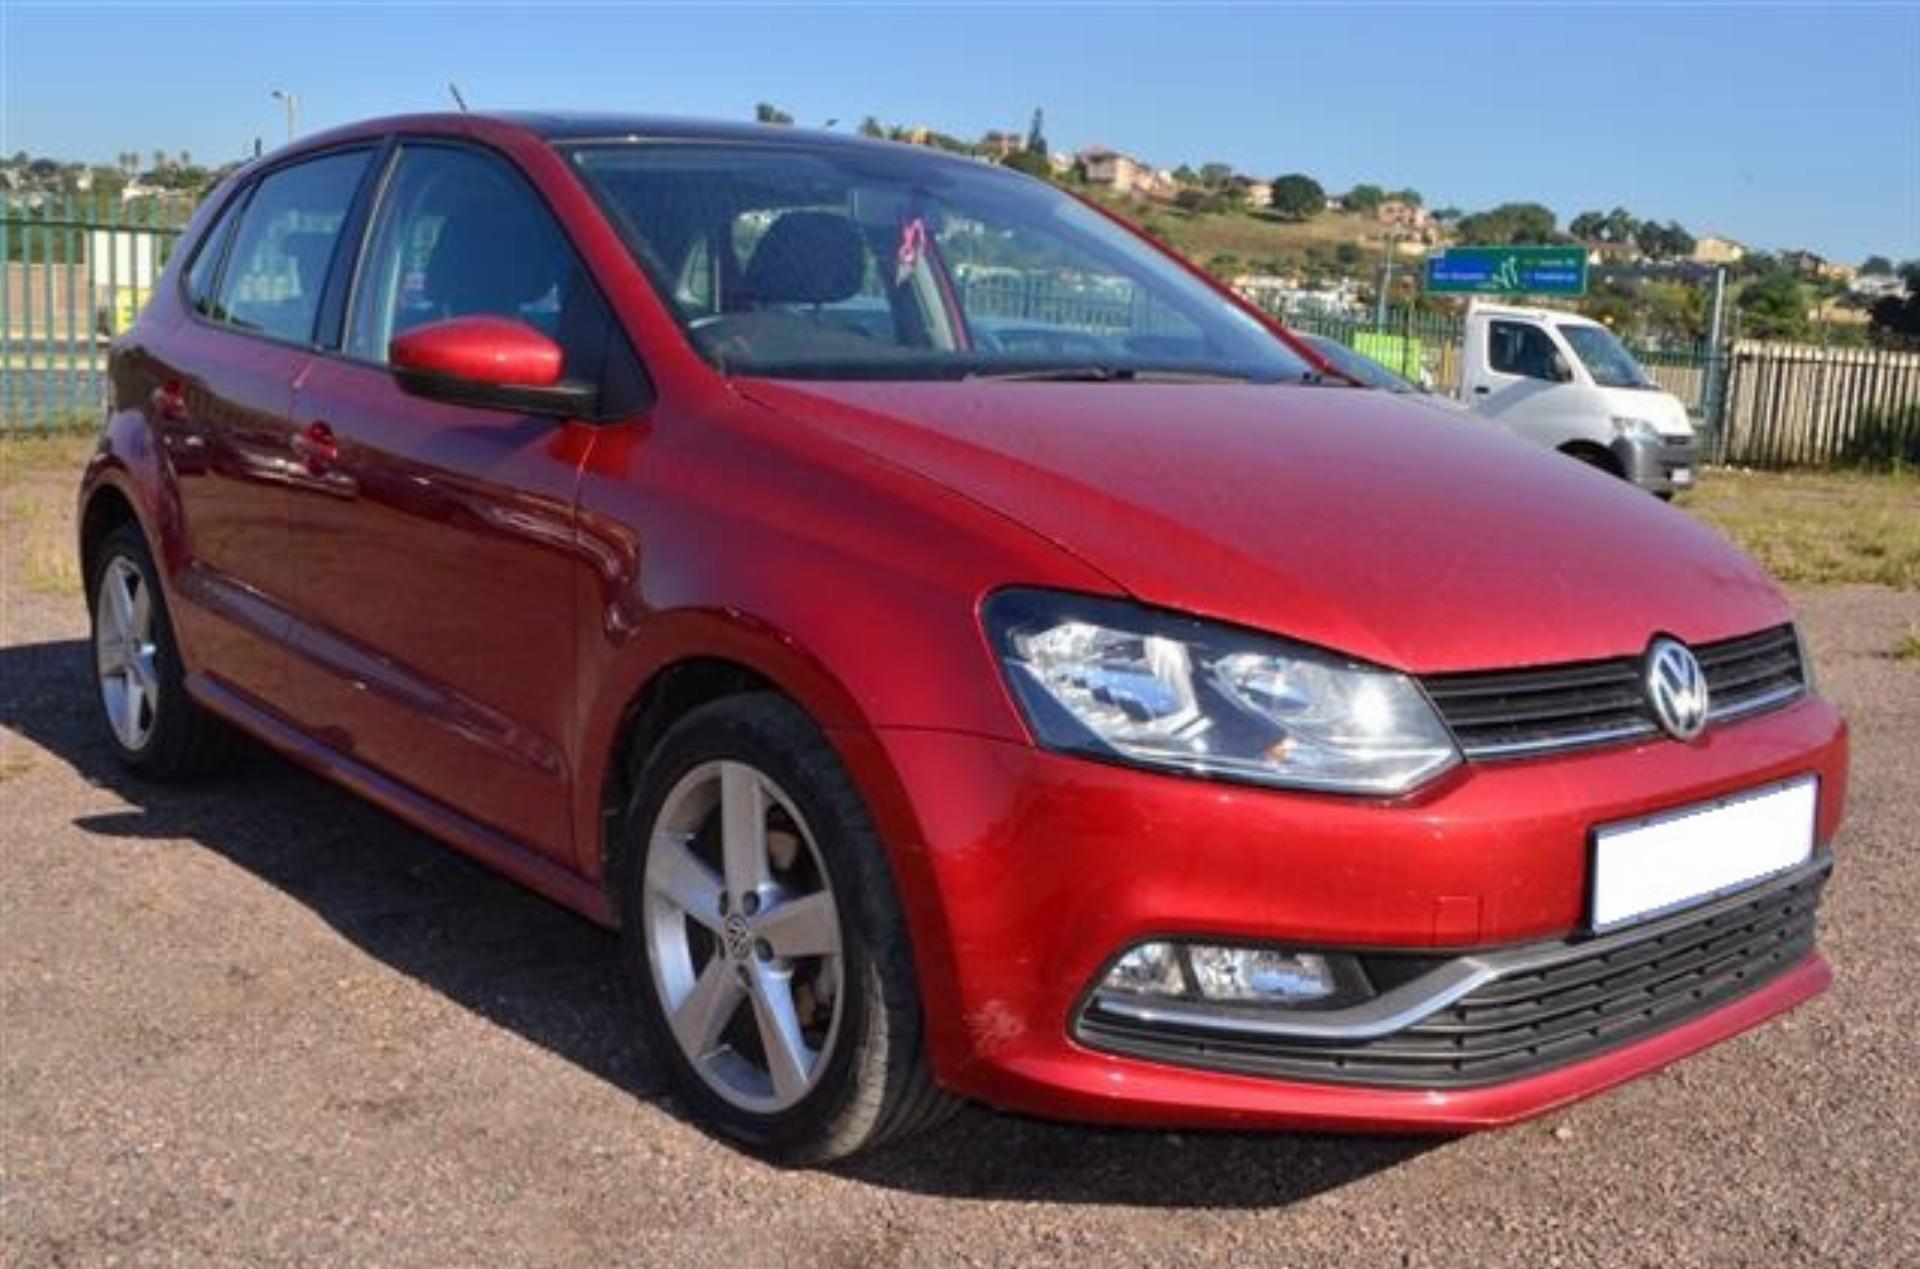 Repossessed Volkswagen Polo GP 1.2 Tsi 2016 on auction